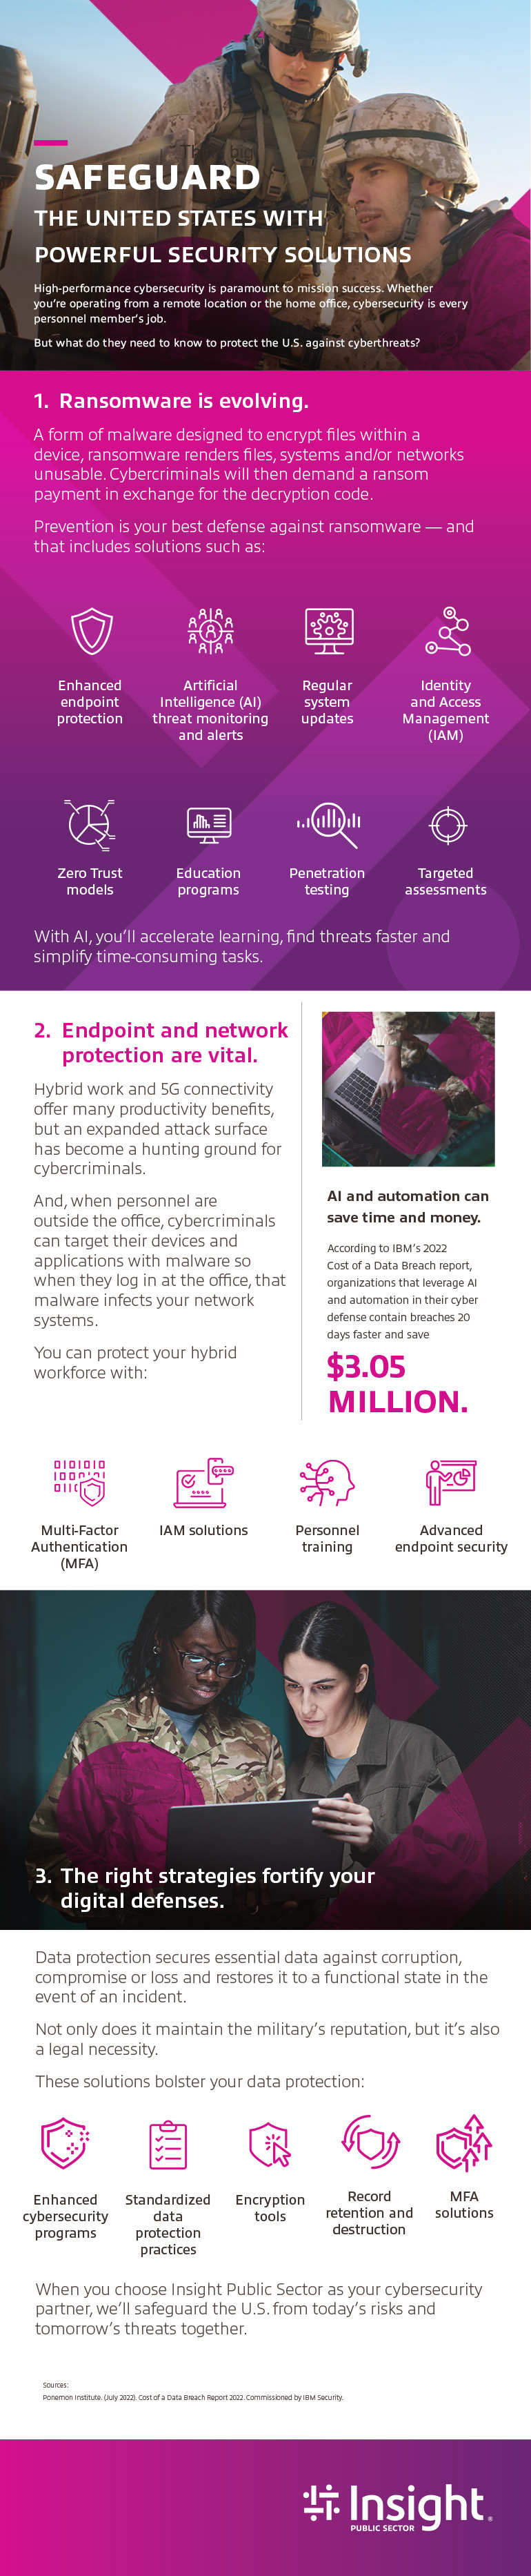 Safeguard the United States With Powerful Security Solutions infographic